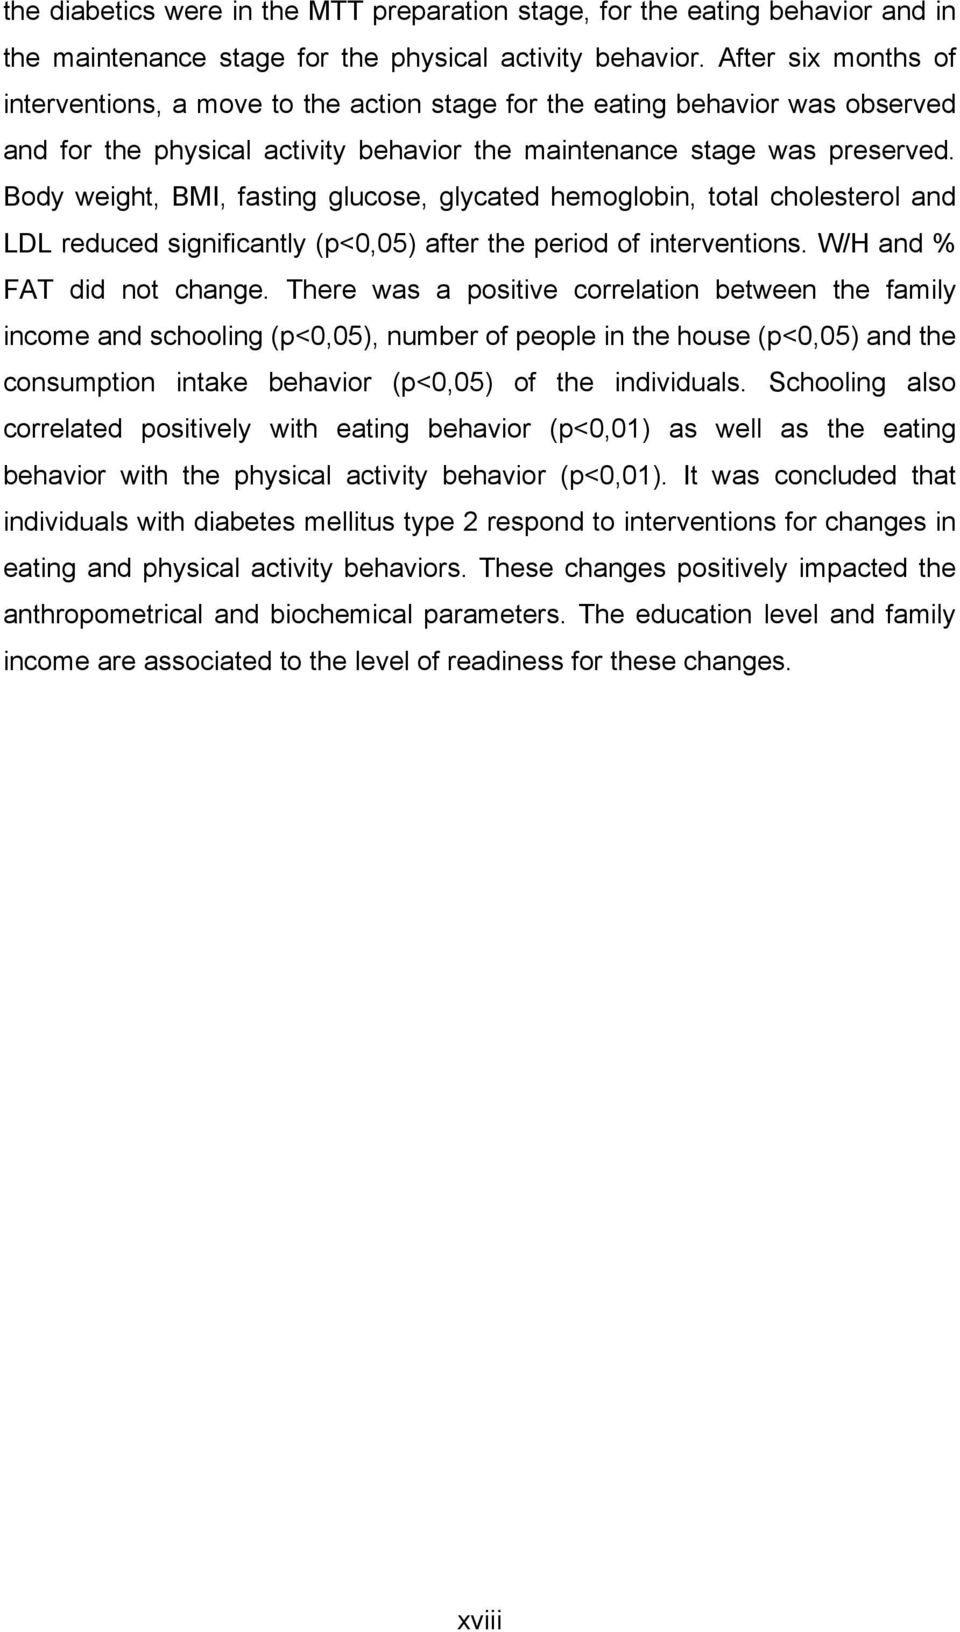 Body weight, BMI, fasting glucose, glycated hemoglobin, total cholesterol and LDL reduced significantly (p<0,05) after the period of interventions. W/H and % FAT did not change.